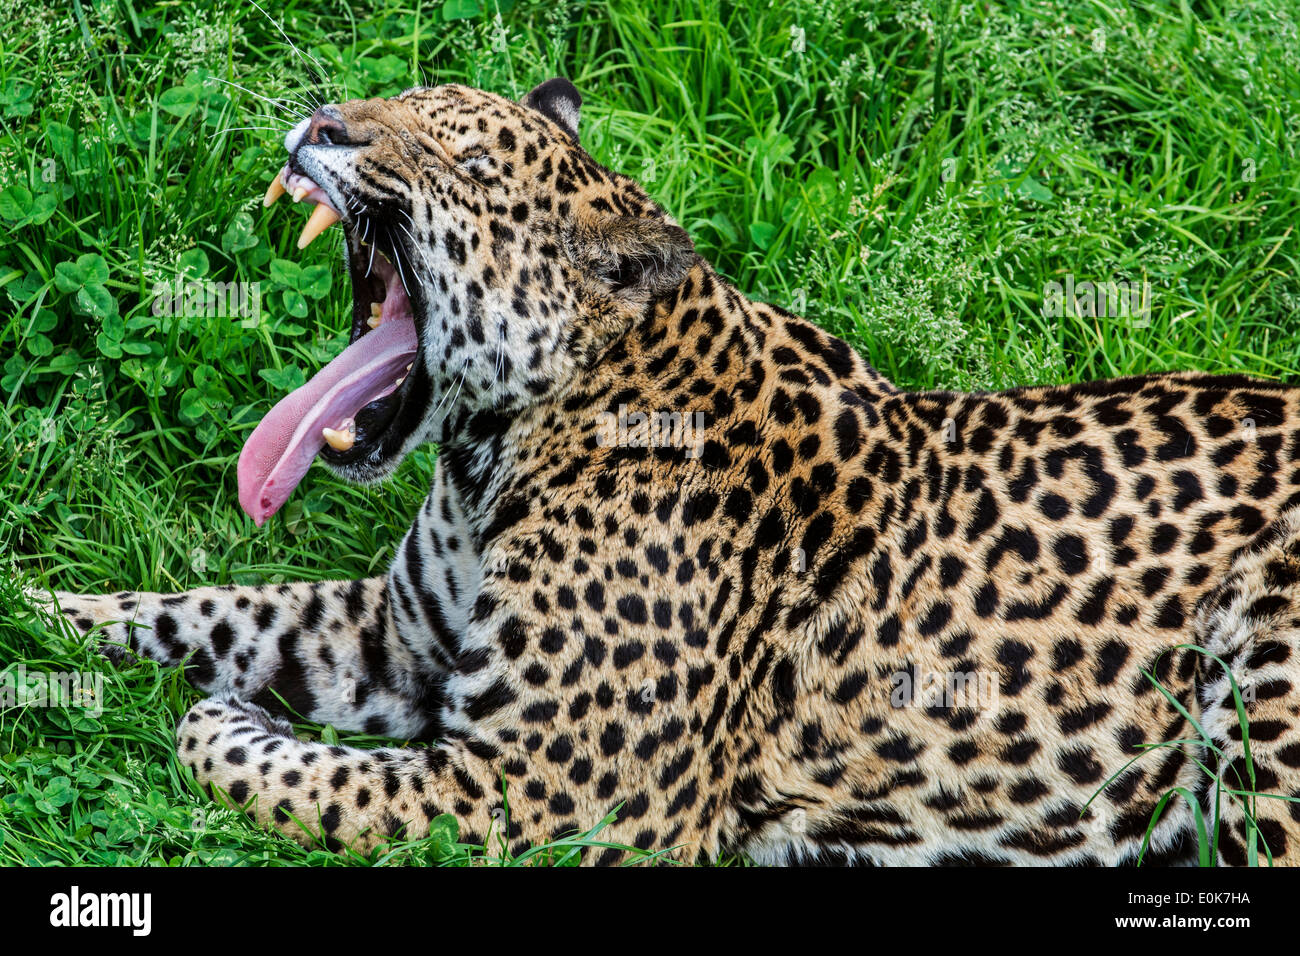 Panther / jaguar (Panthera onca) yawning, native to Central and South America Stock Photo